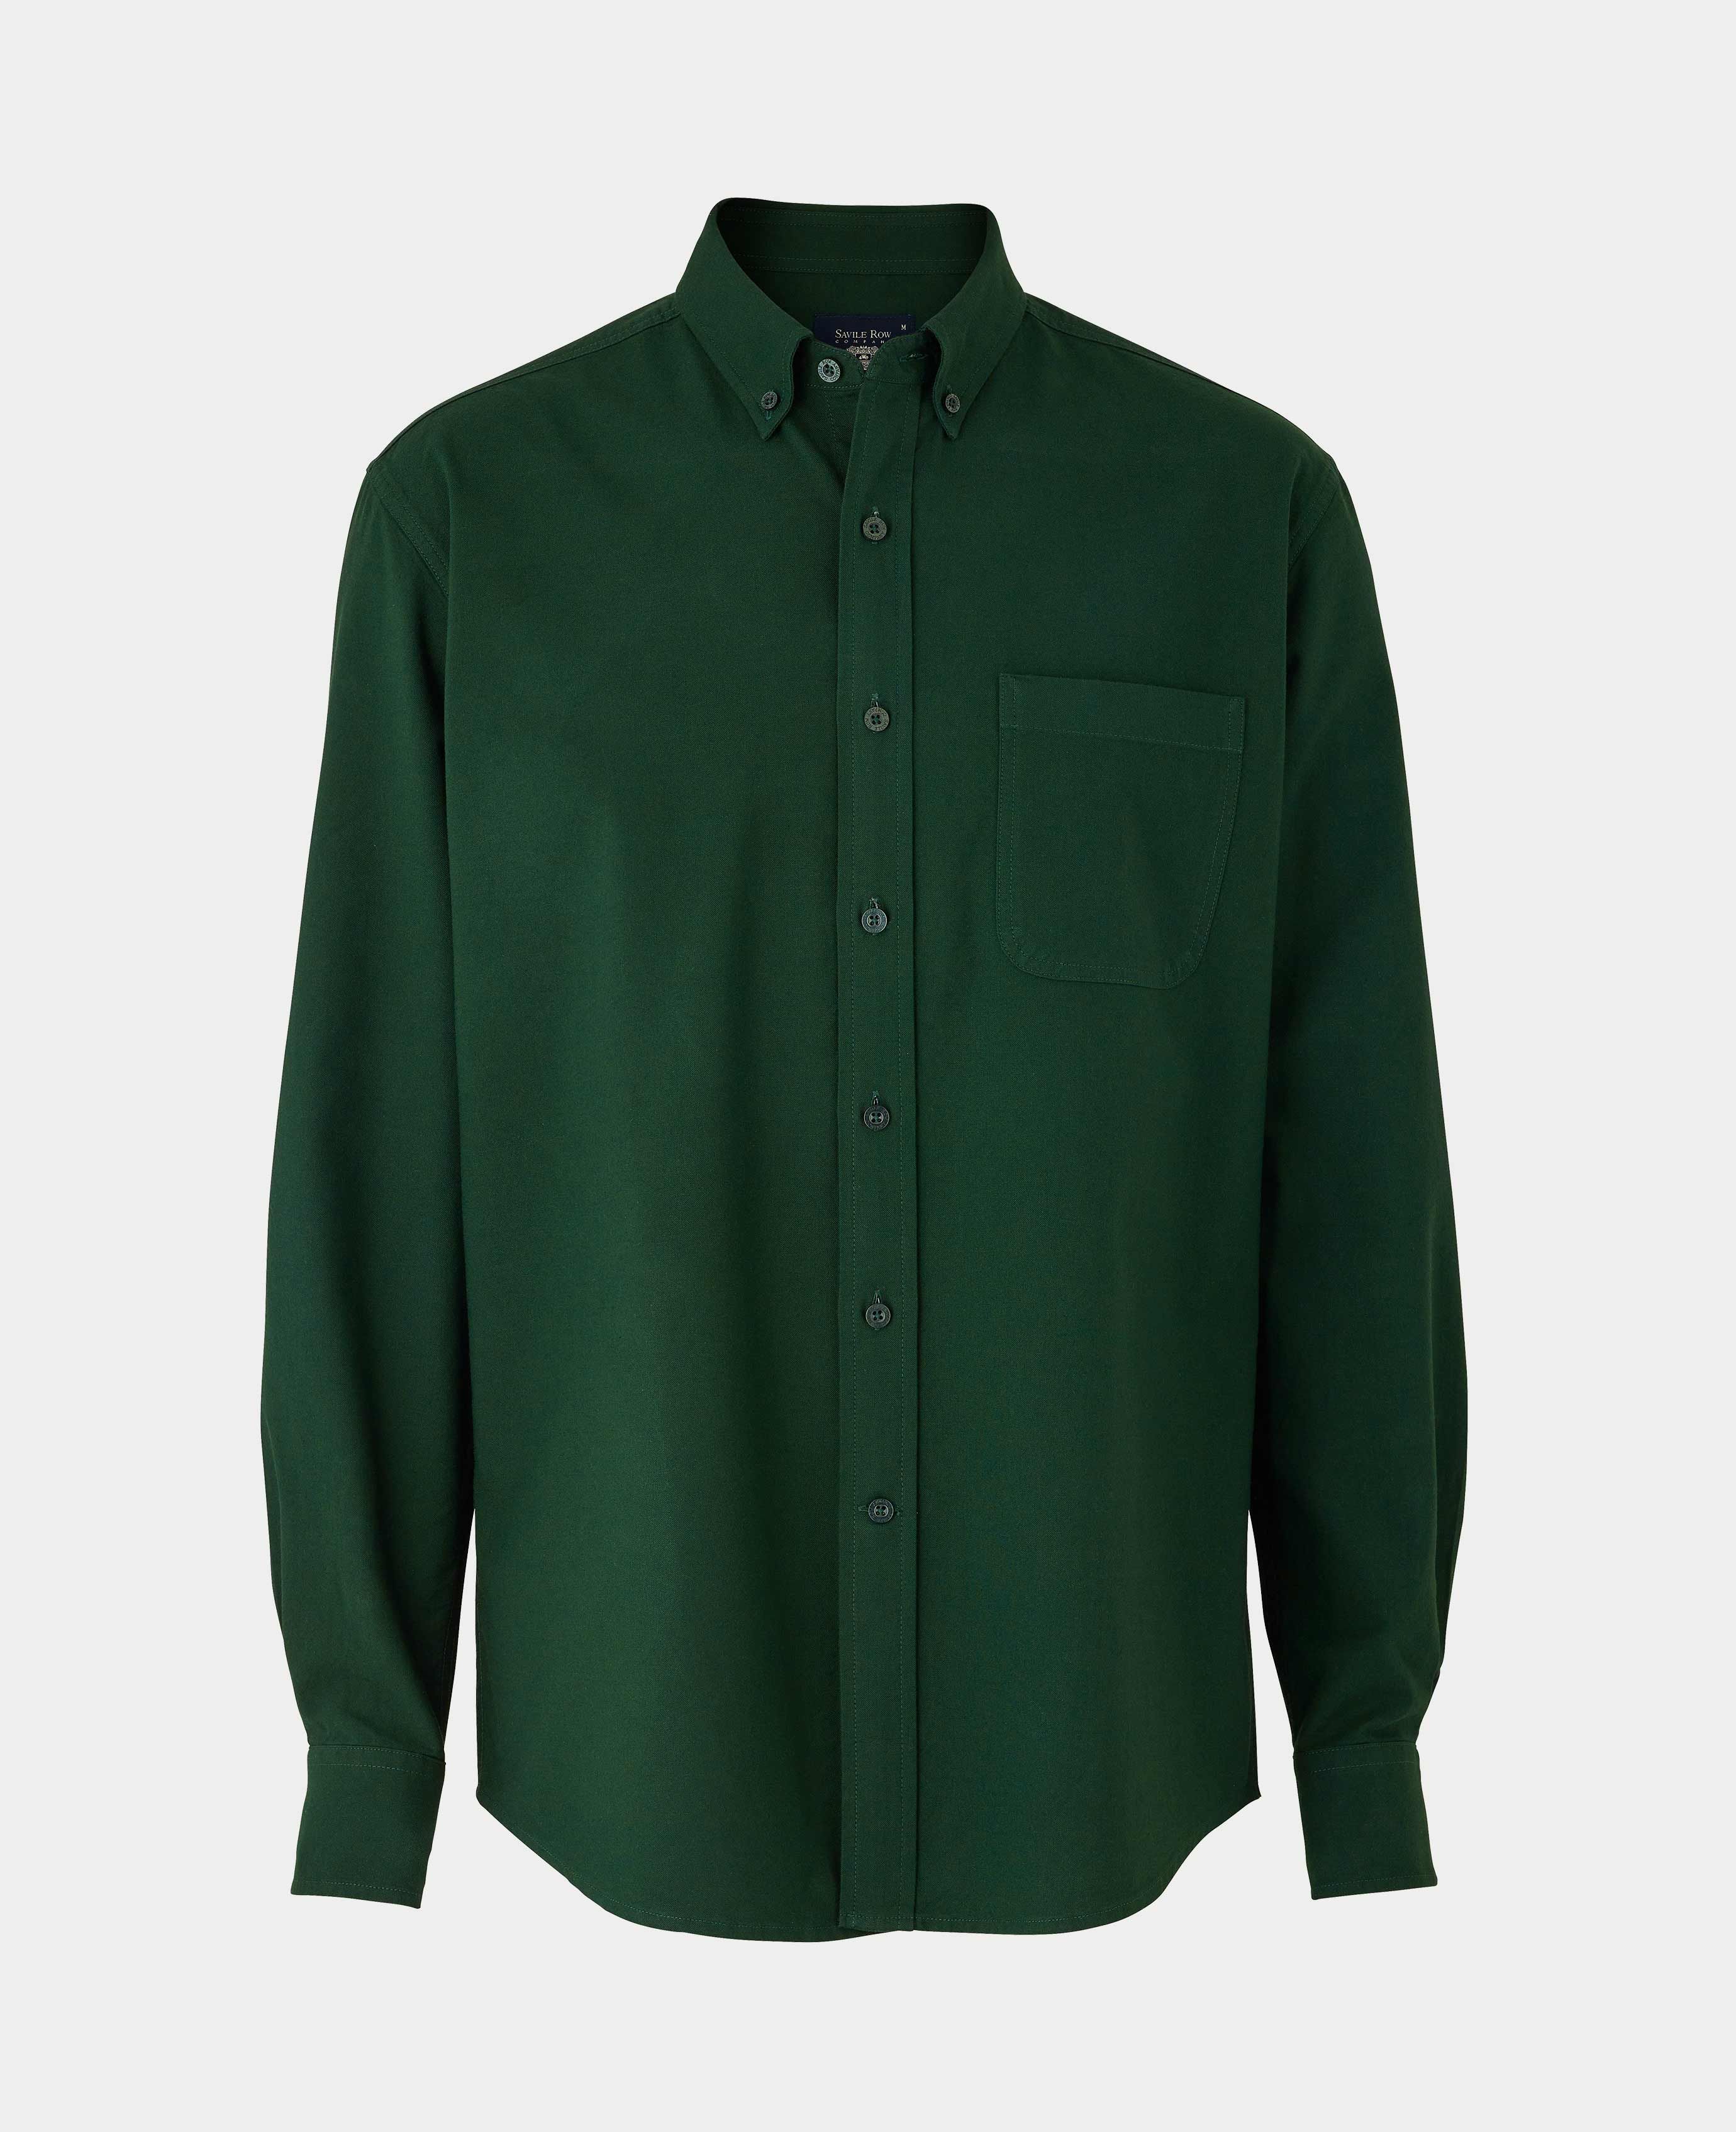 Men’s Classic Oxford Shirt in Forest Green | Savile Row Co